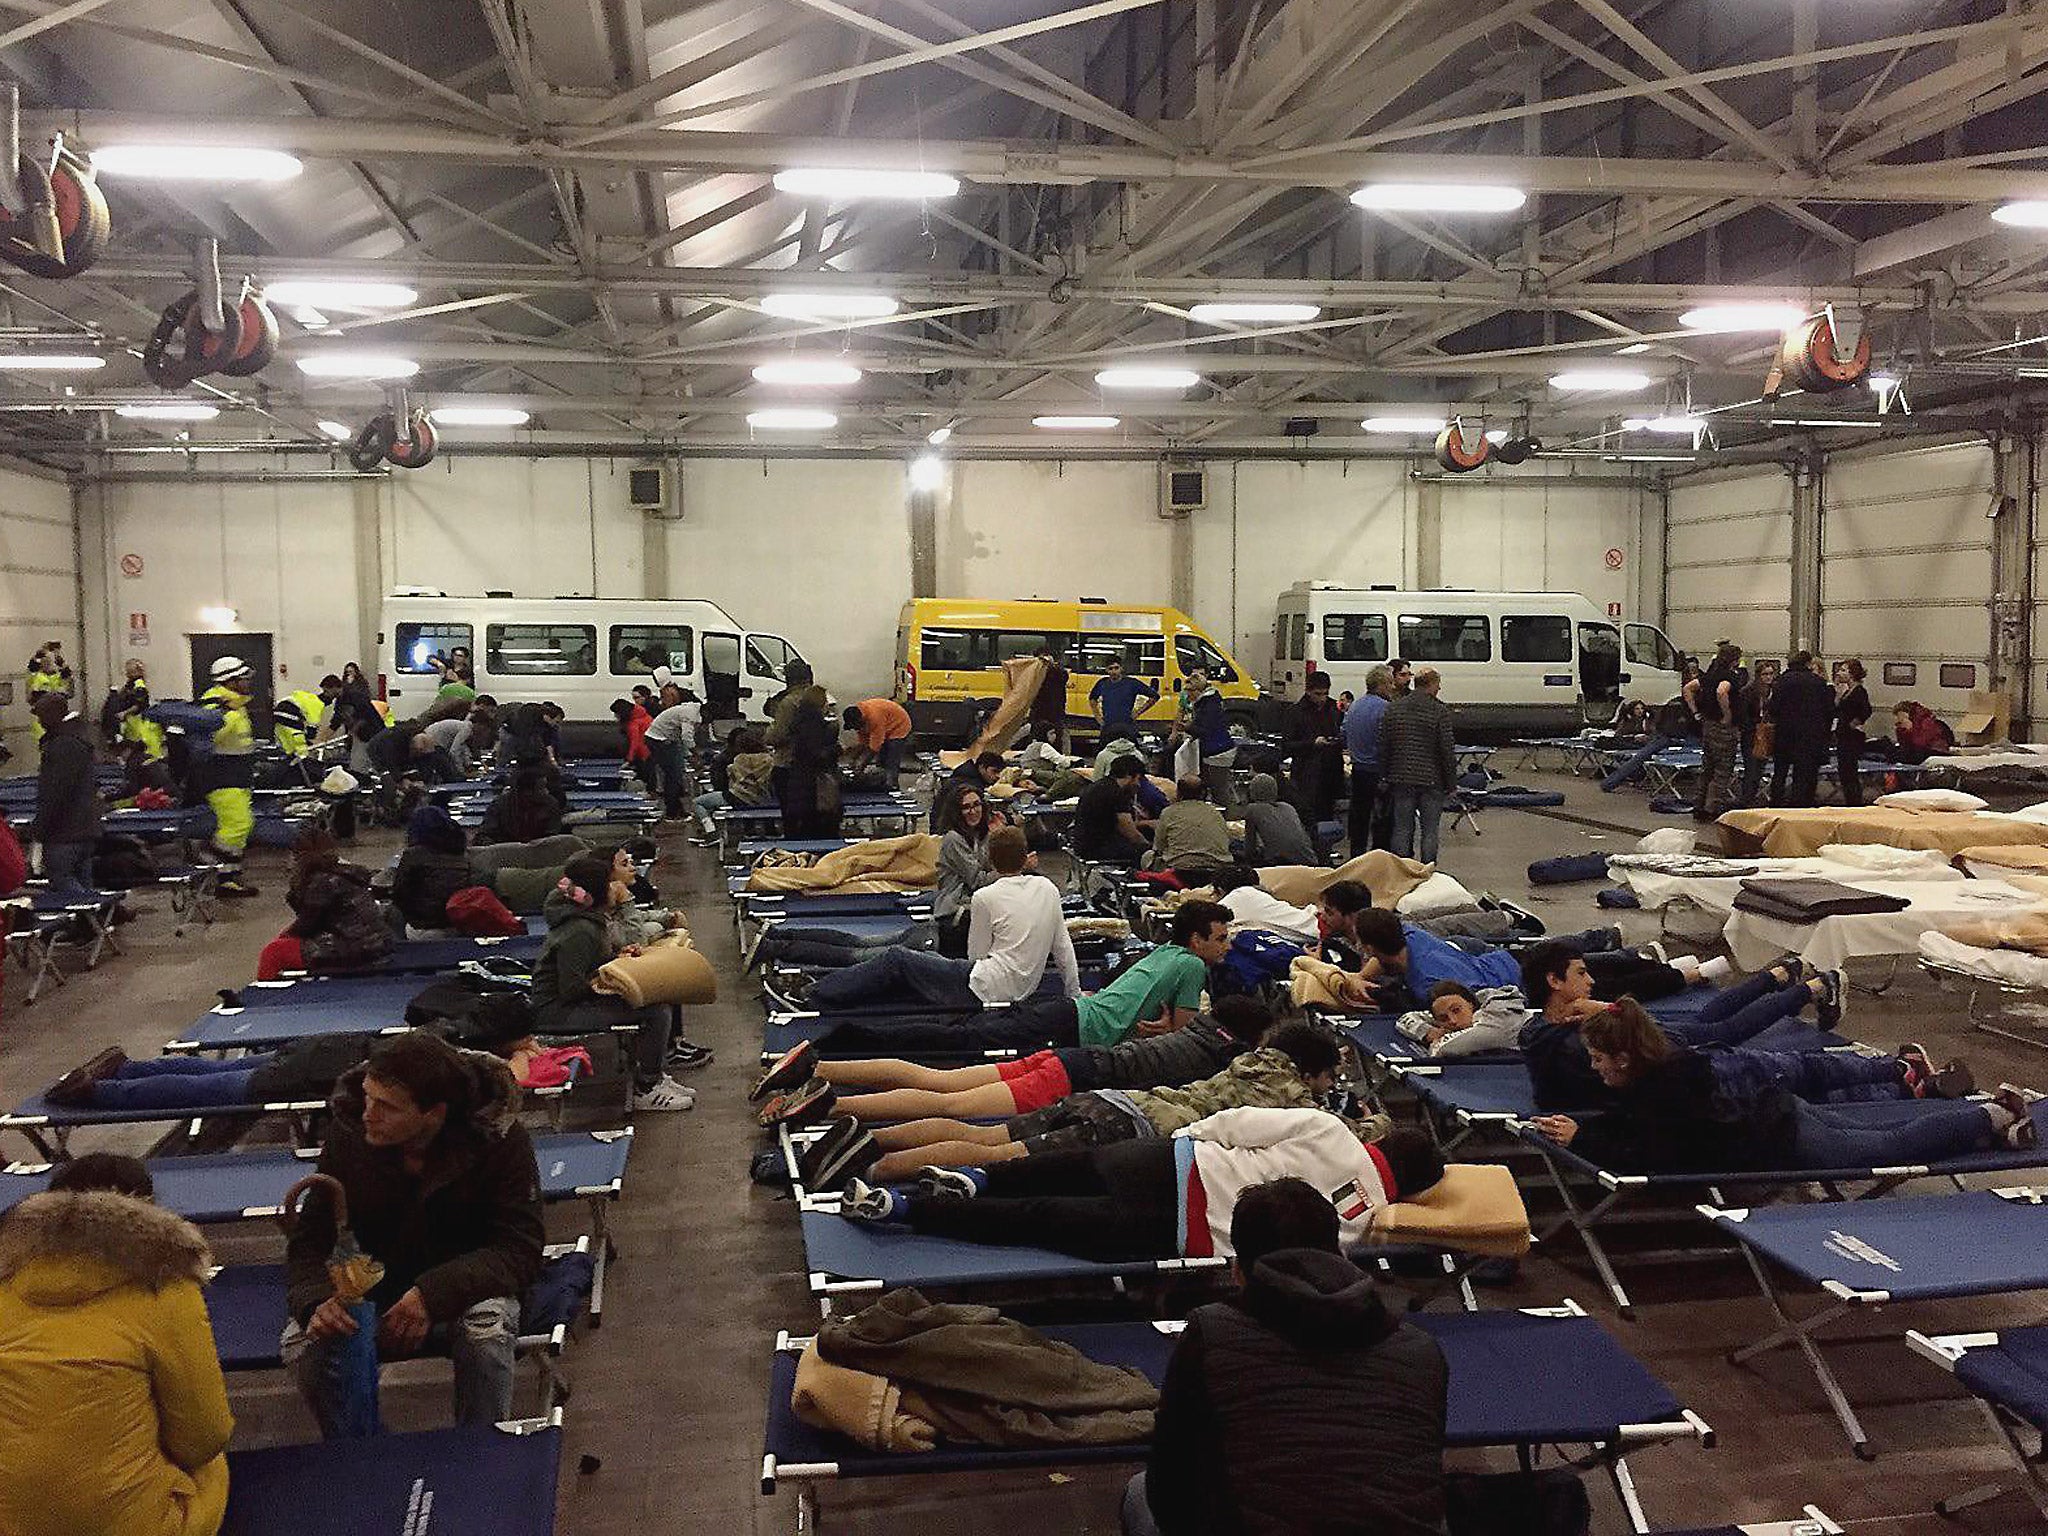 Evacuated people spend the night in a temporary shelter, in Camerino, Marche Region, central Italy